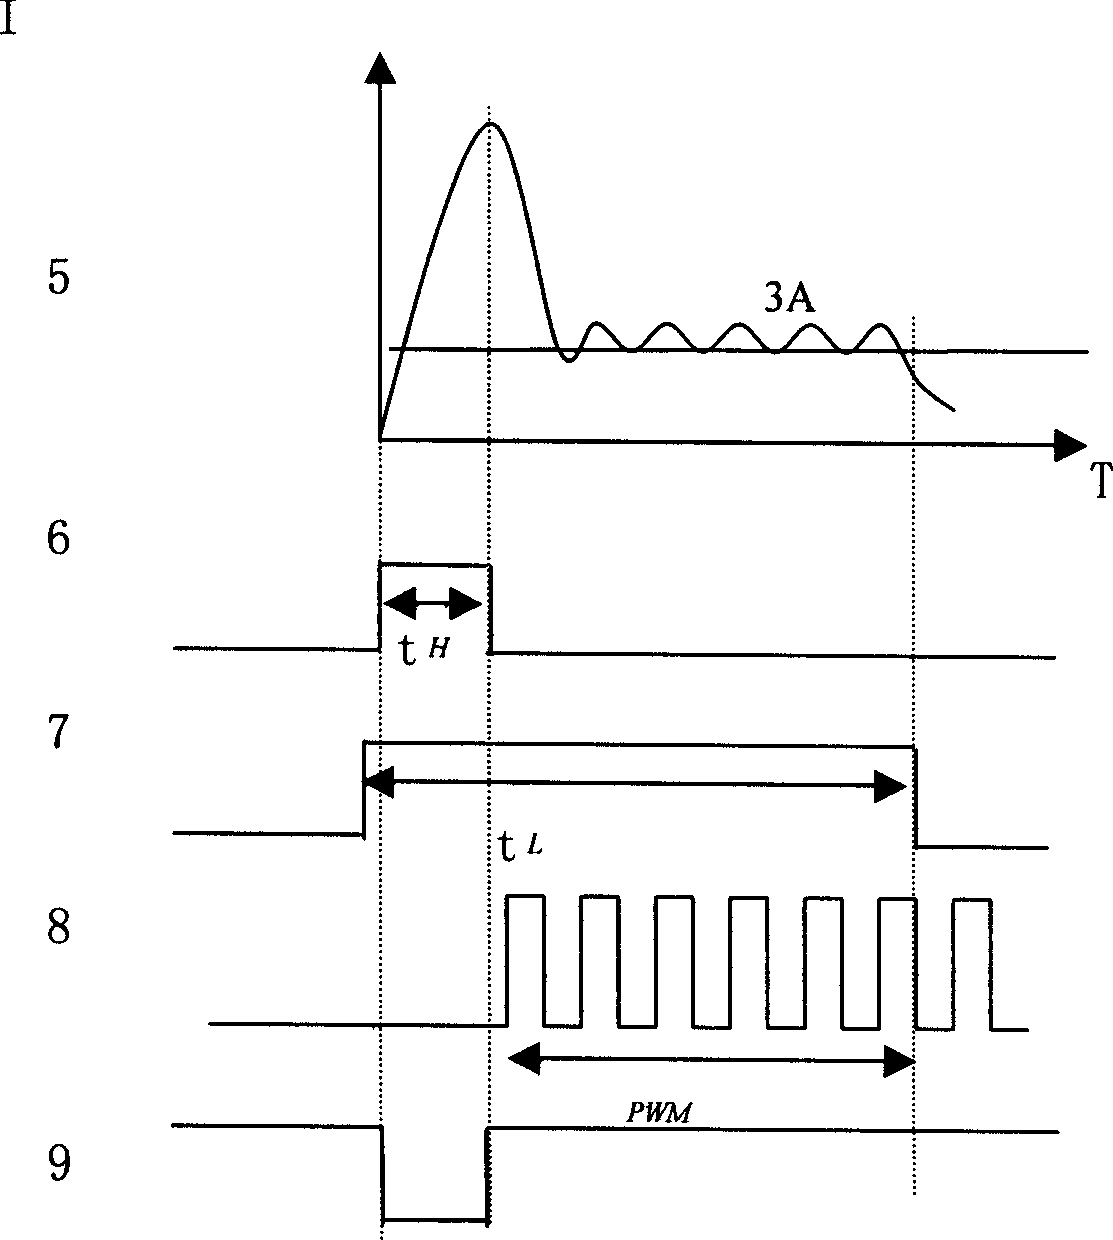 Drive circuit of high and low level switch combination with voltage boost circuit